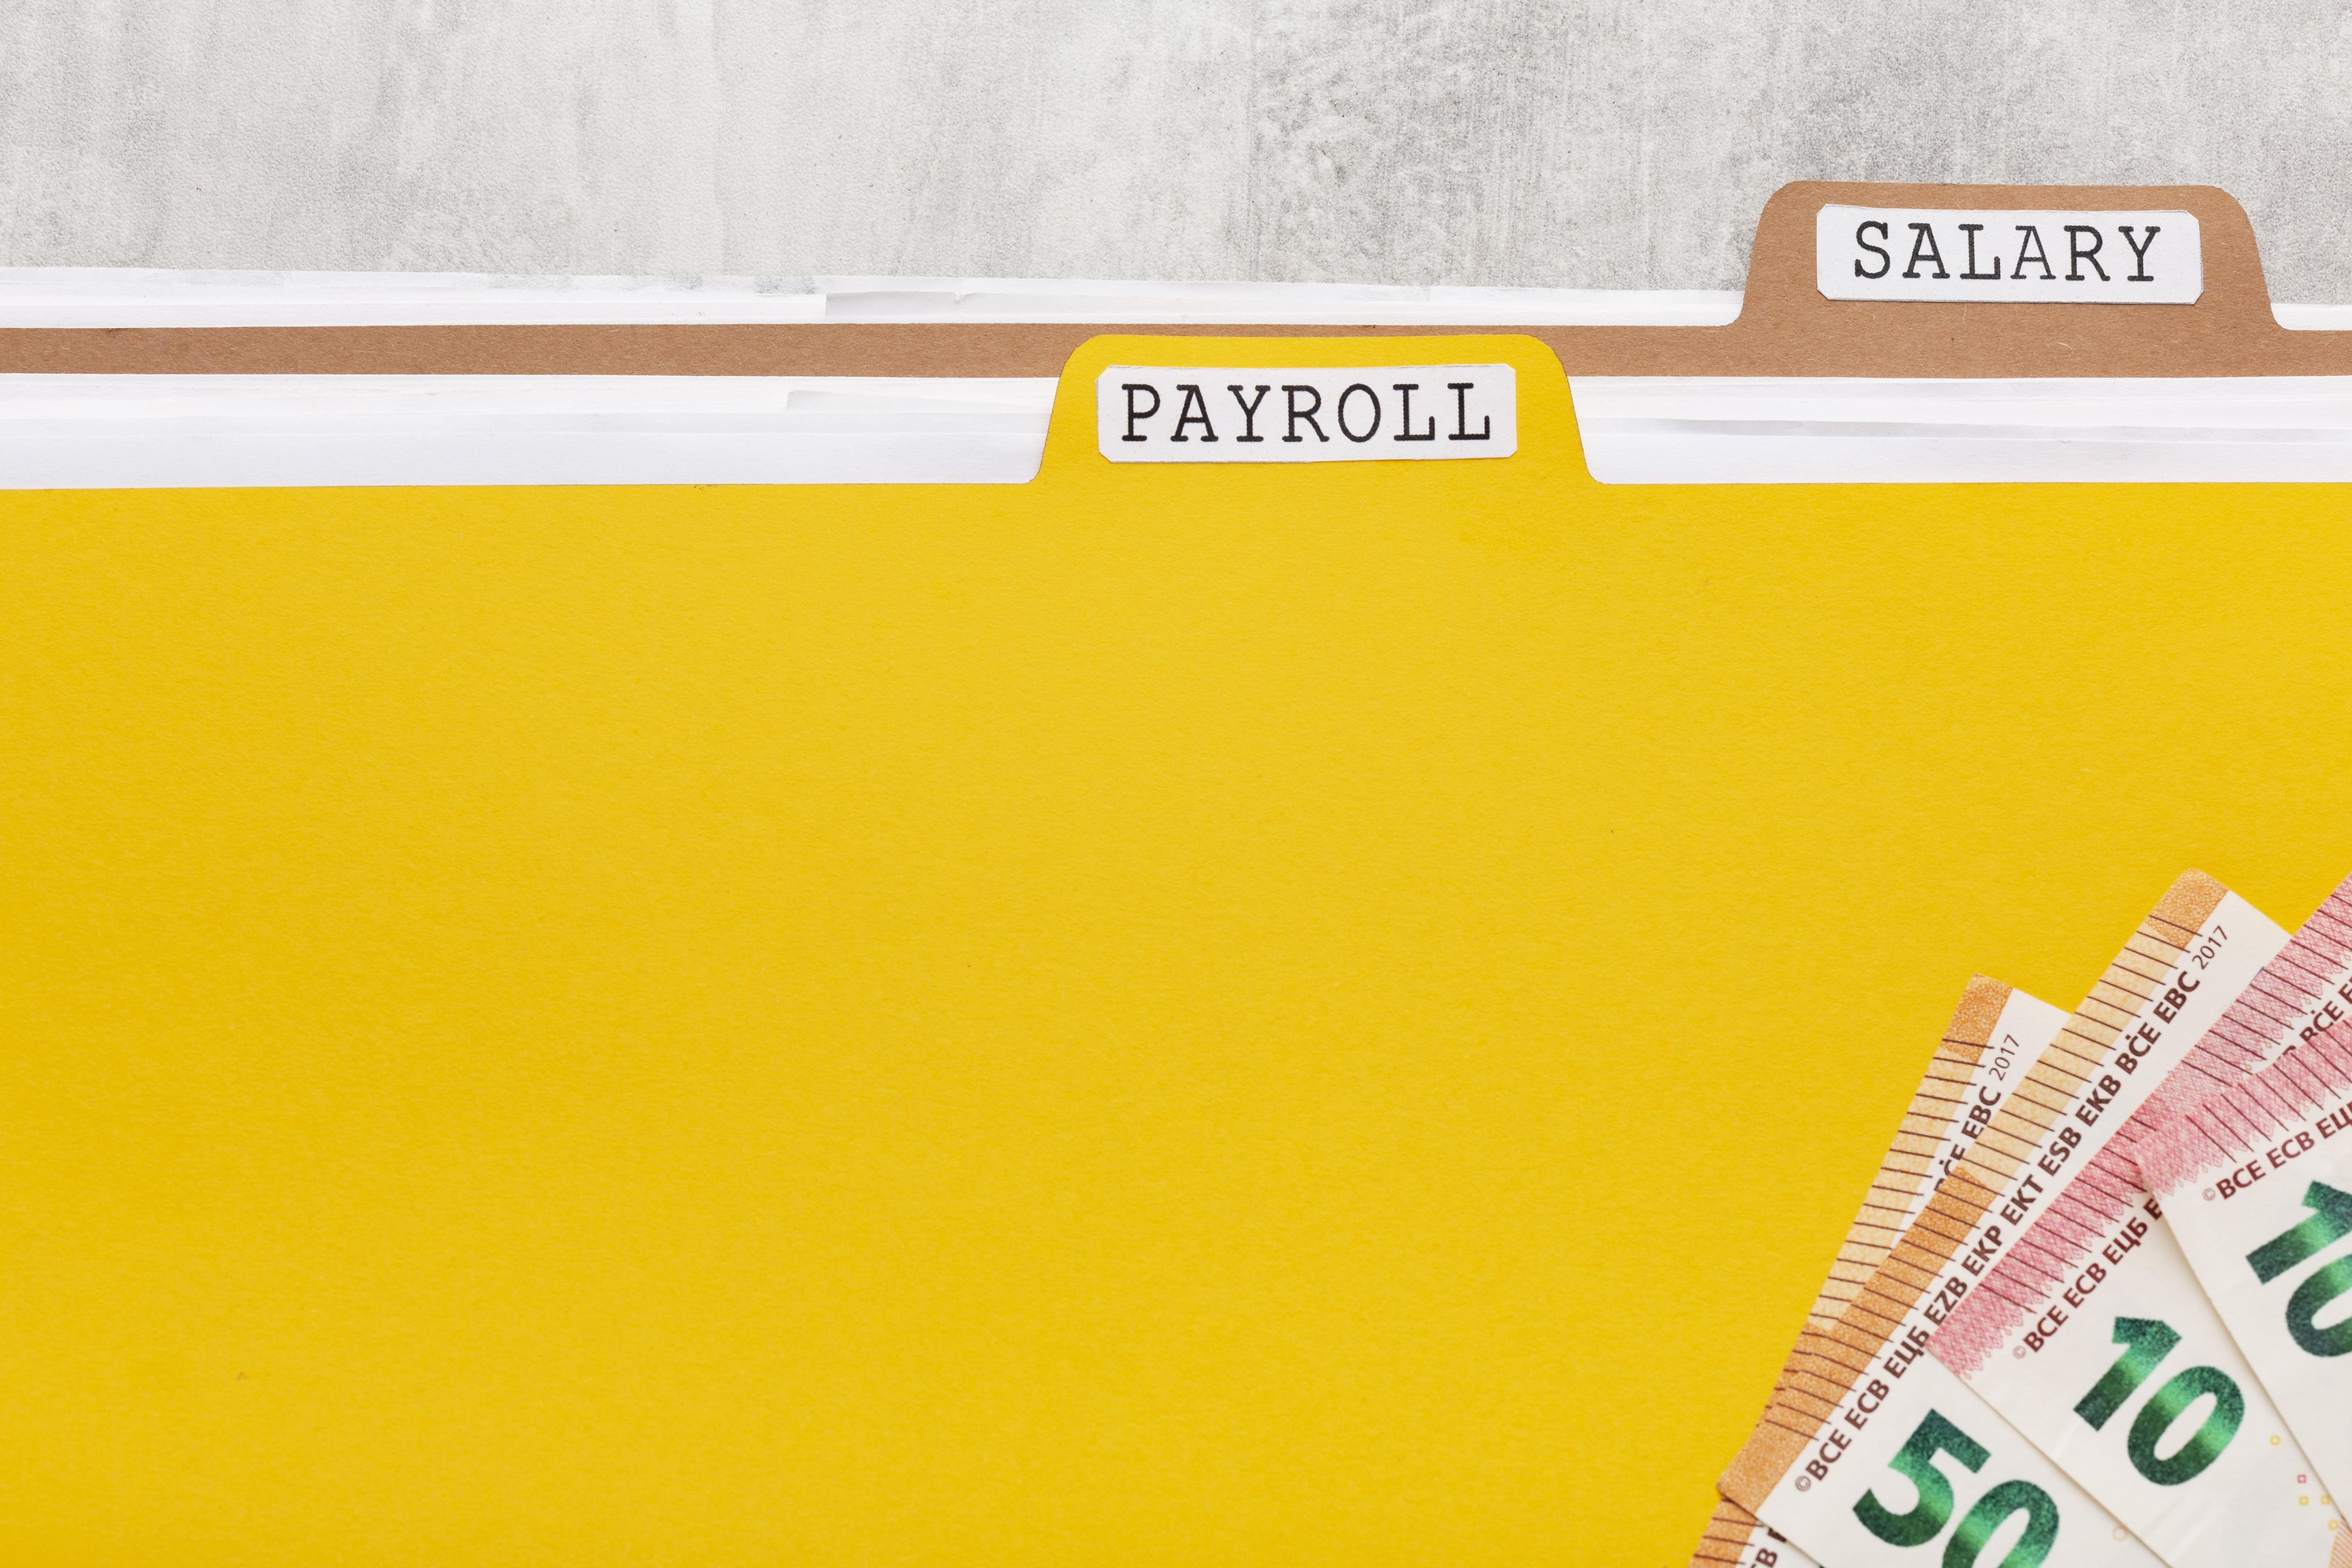 Payroll-and-Salary - Finance for Professionals Financial Services